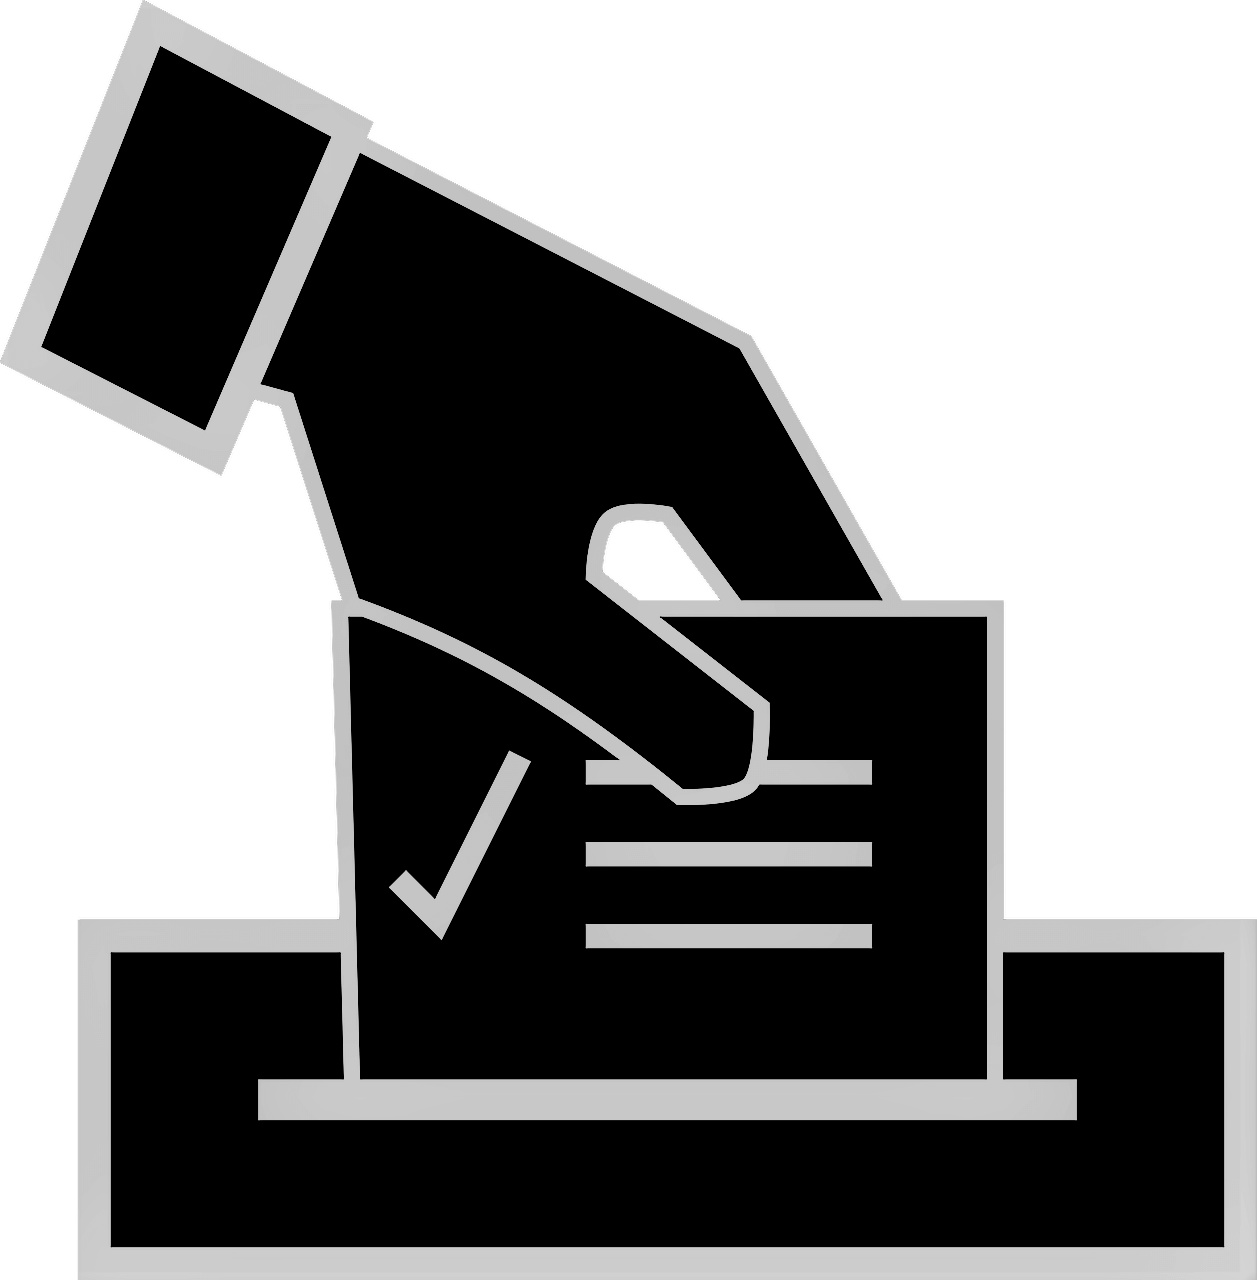 election clipart polling booth